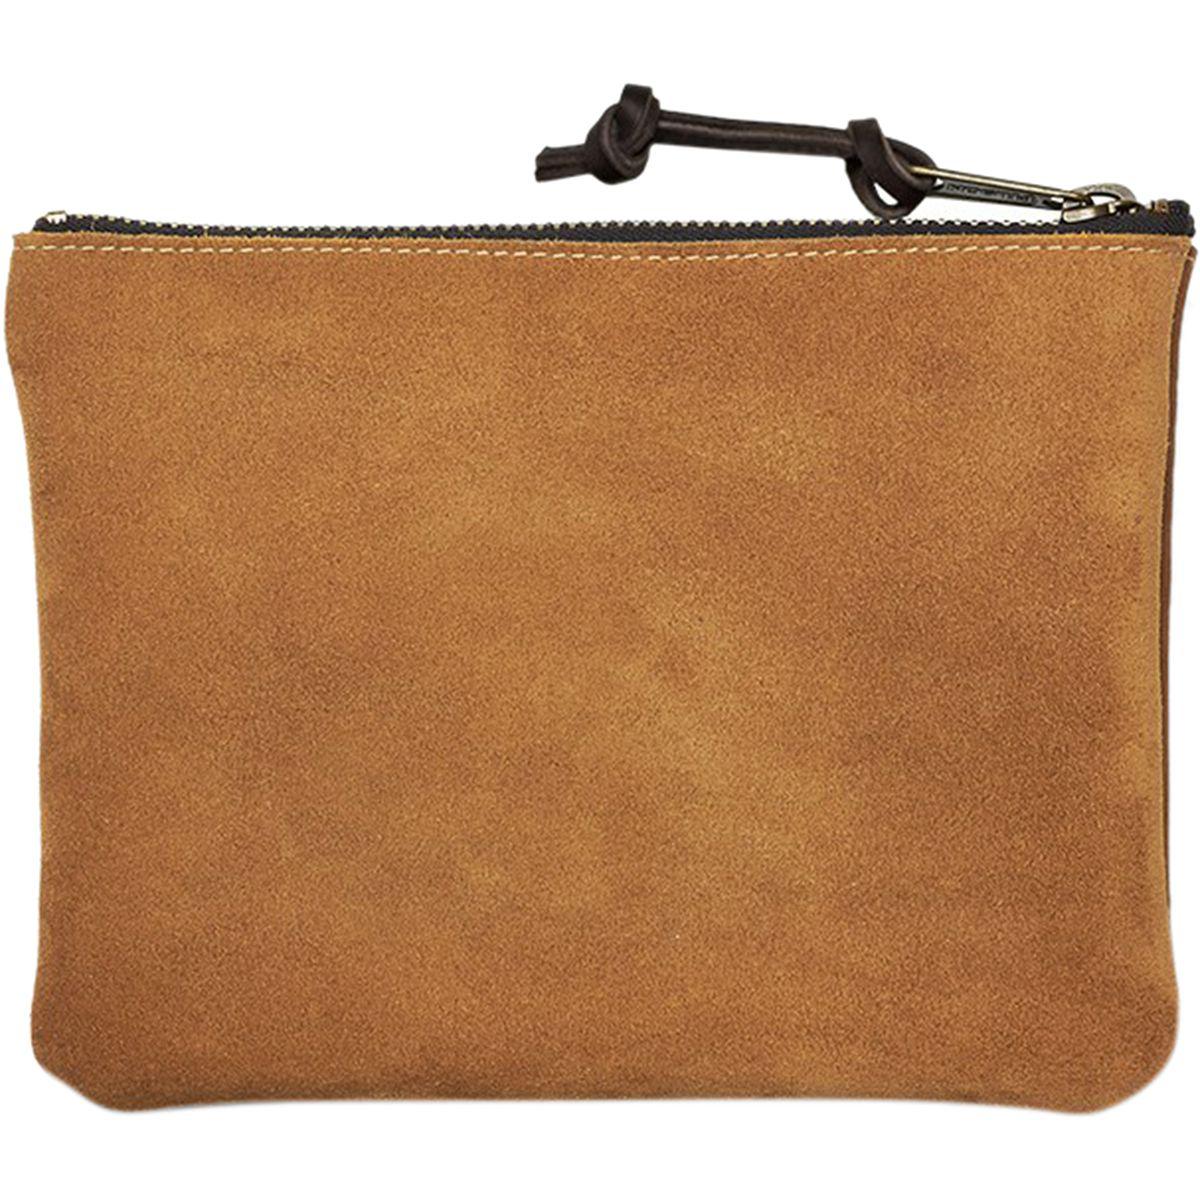 Filson Rugged Suede Pouch - Medium in Brown for Men - Lyst